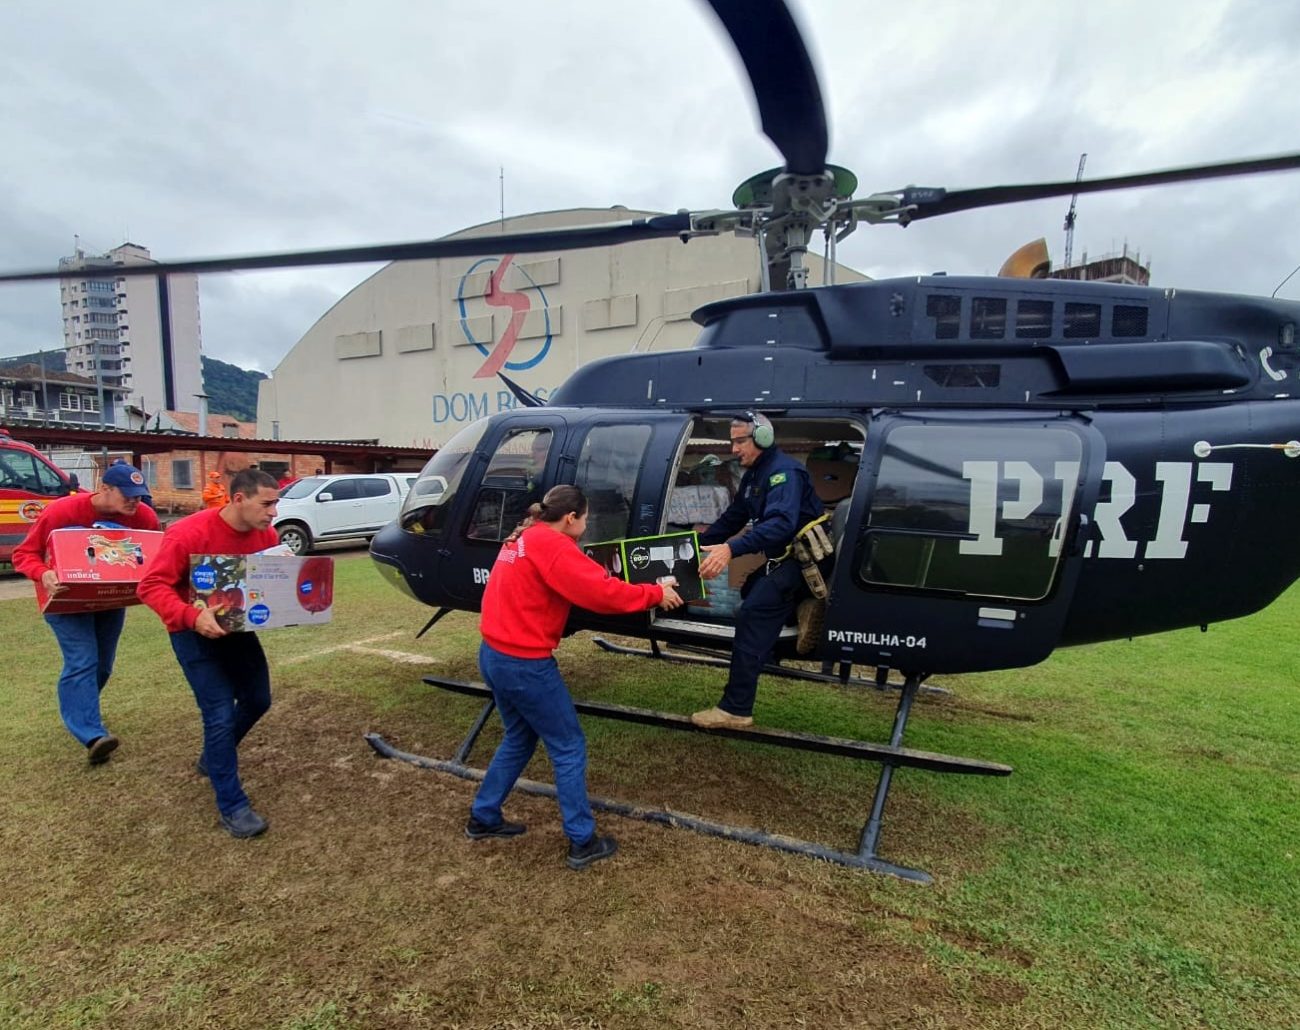 In 10 days of operation, a Federal Traffic Police aircraft transported more than 79 people to Alto Vale do Itajaí - reproduction PRF/ND